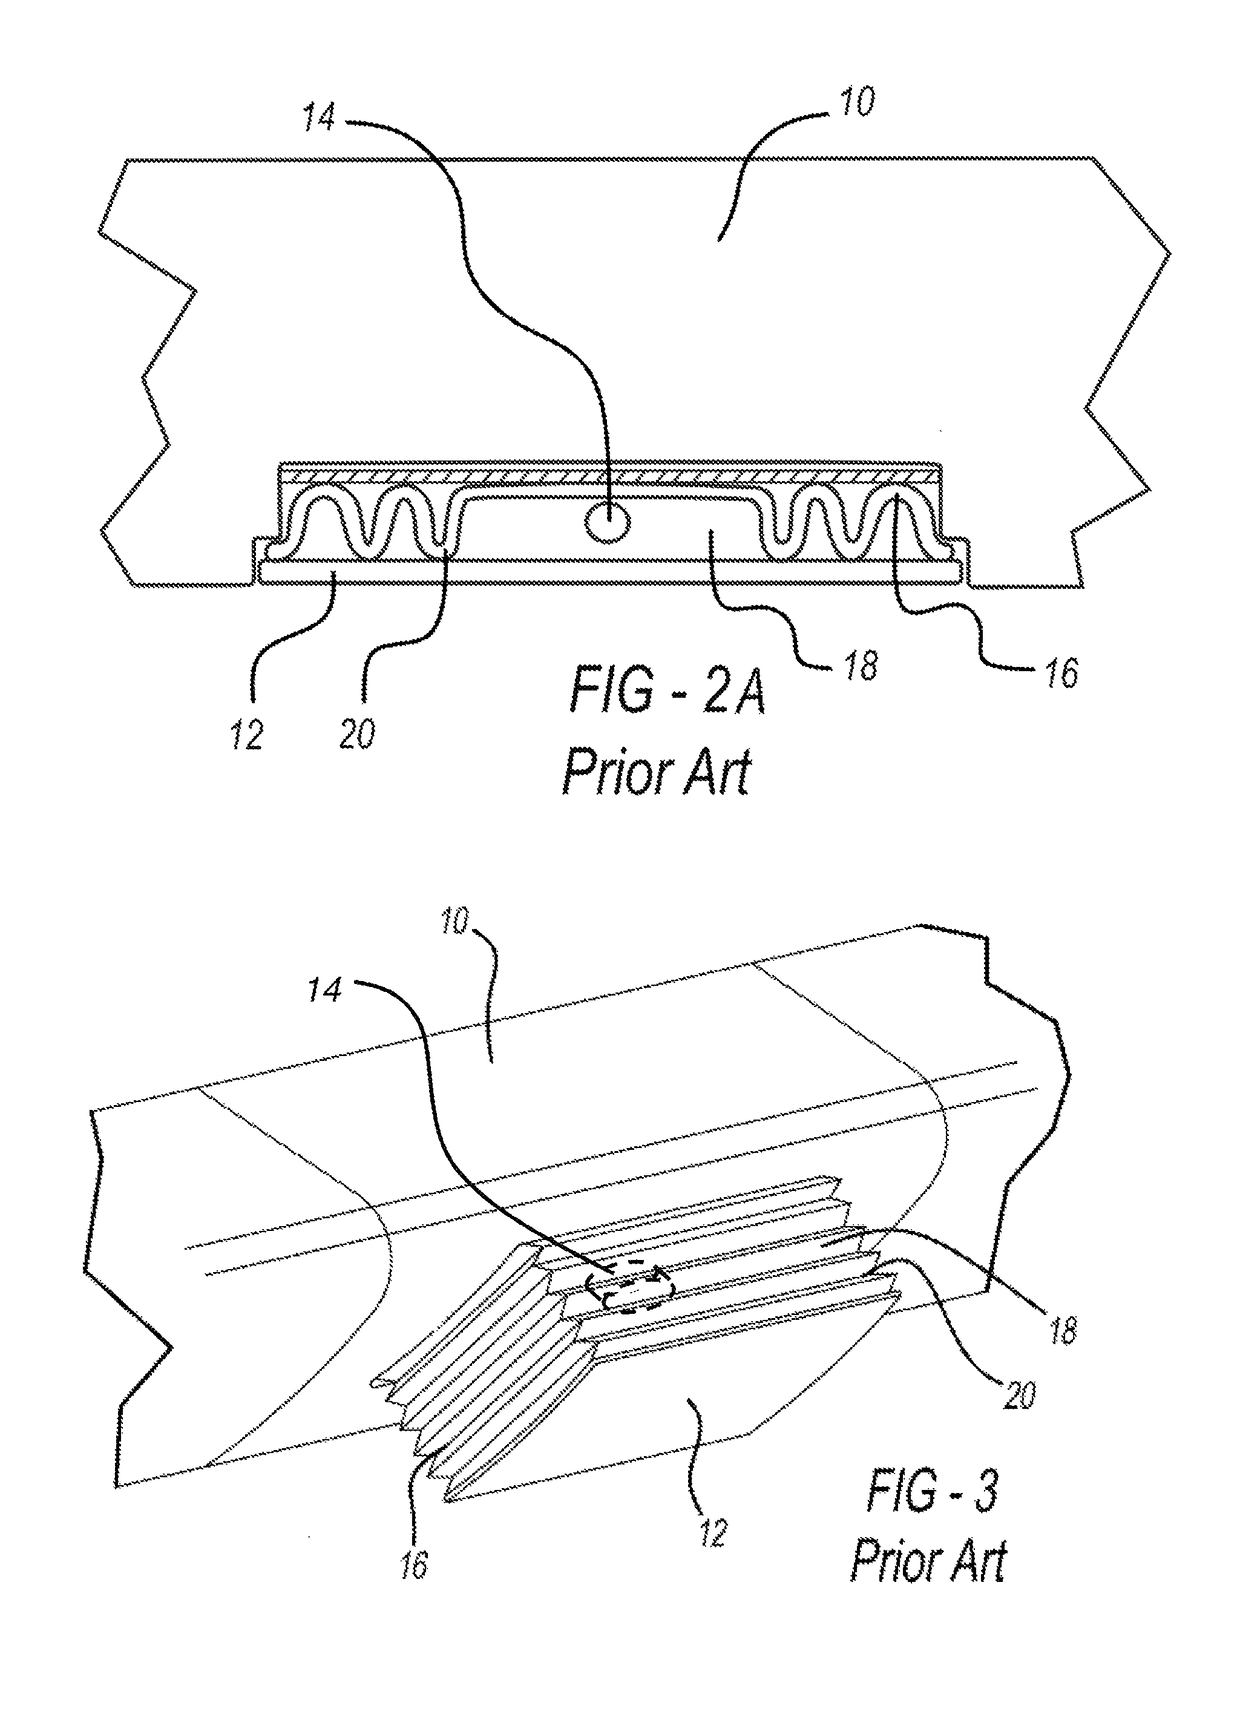 Deployable semi-rigid body contact restraint member with integral flexible expansion member